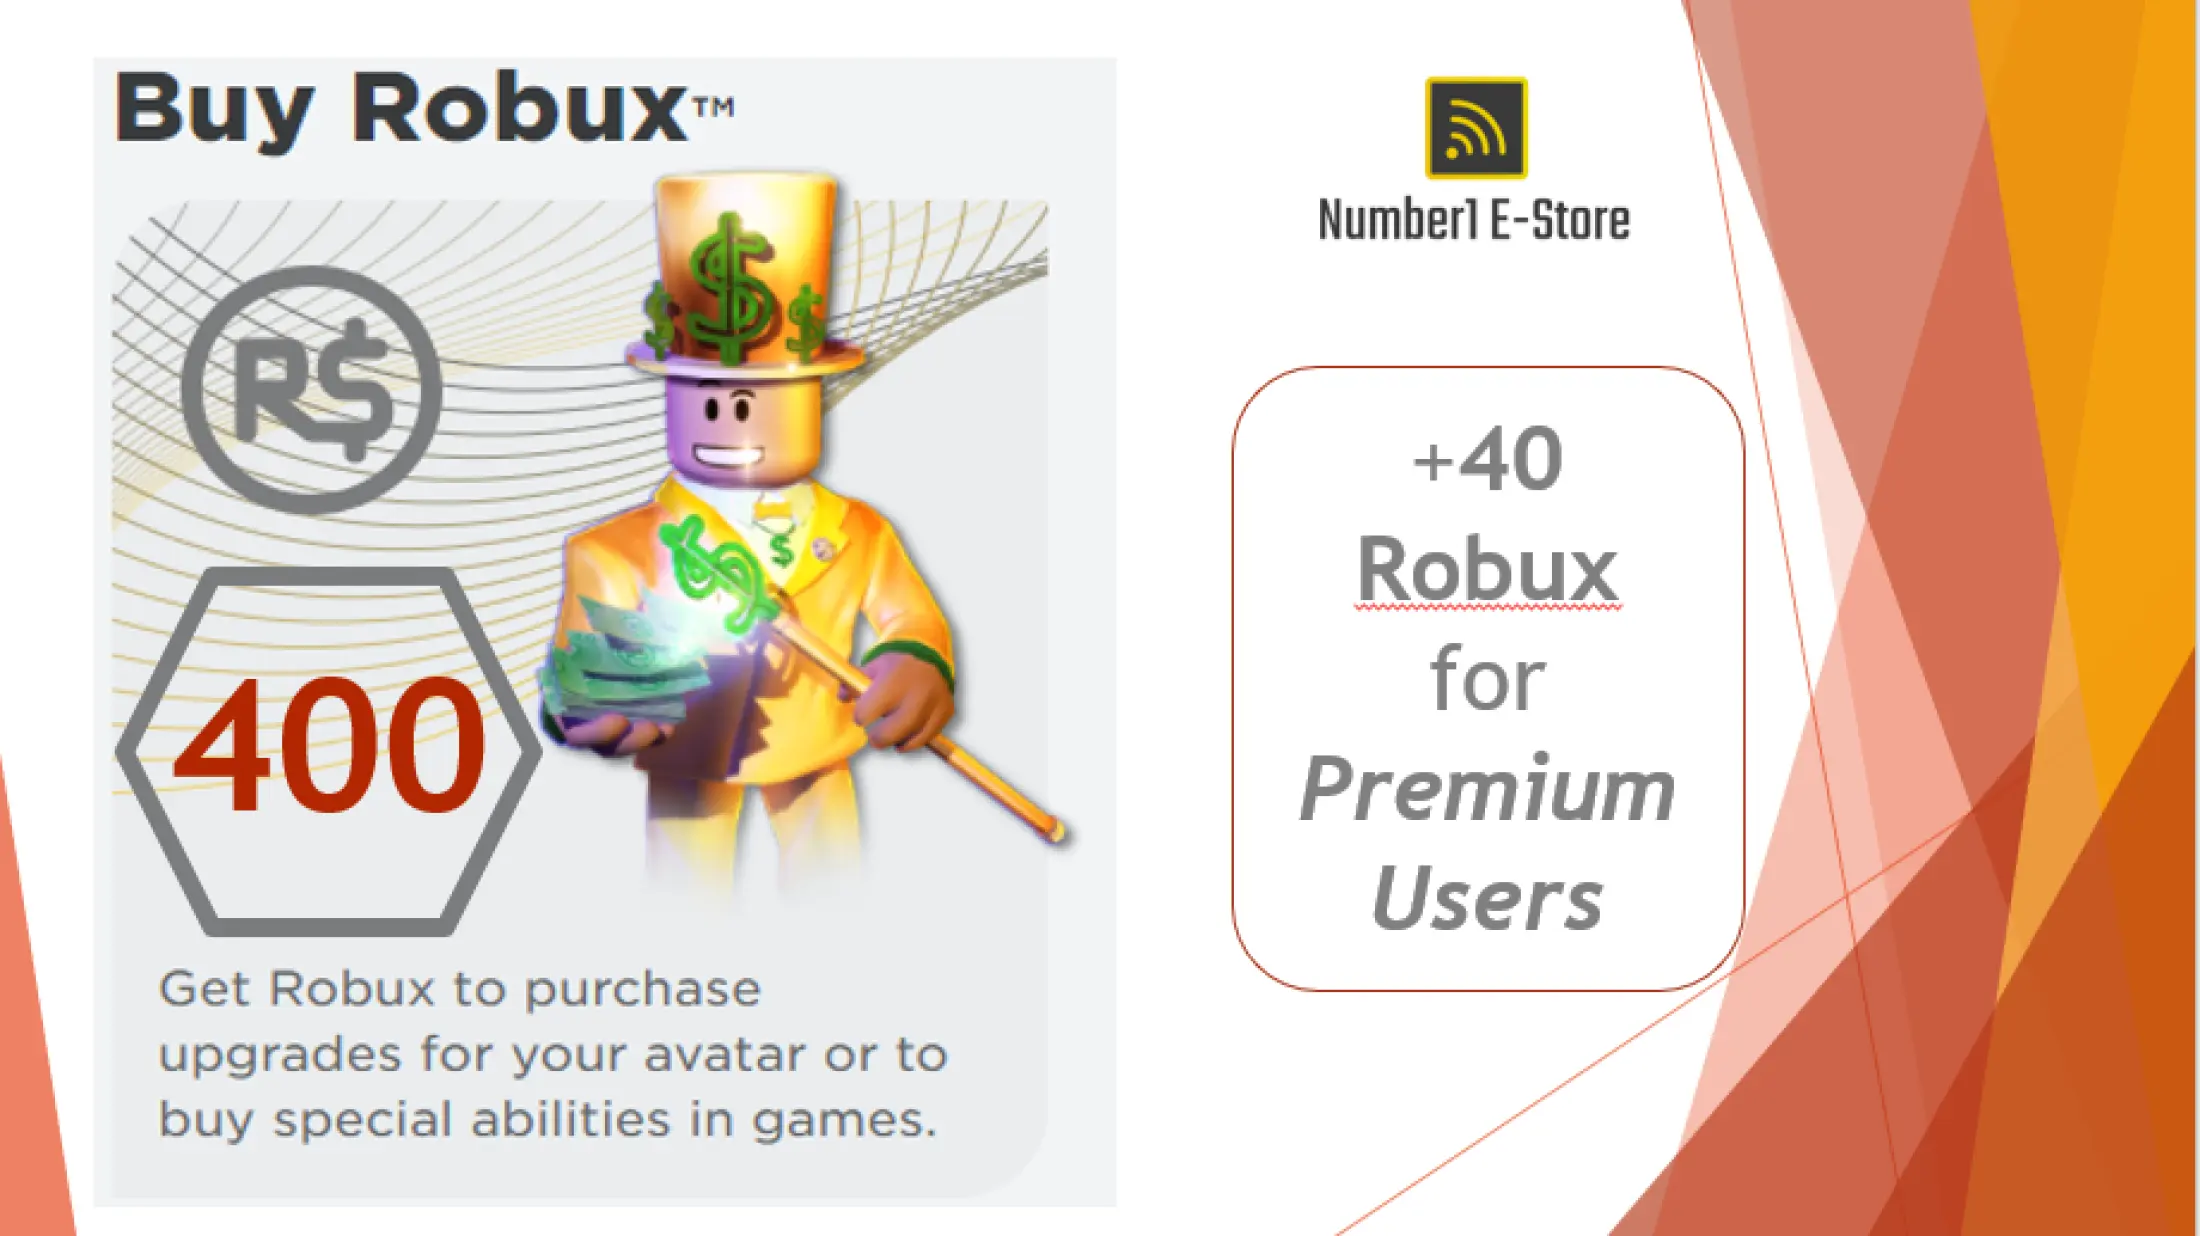 Roblox 400 Robux Direct Top Up 400 Robux This Is Not A Code Or A Card Direct Top Up Only Lazada Ph - 400 robux premium